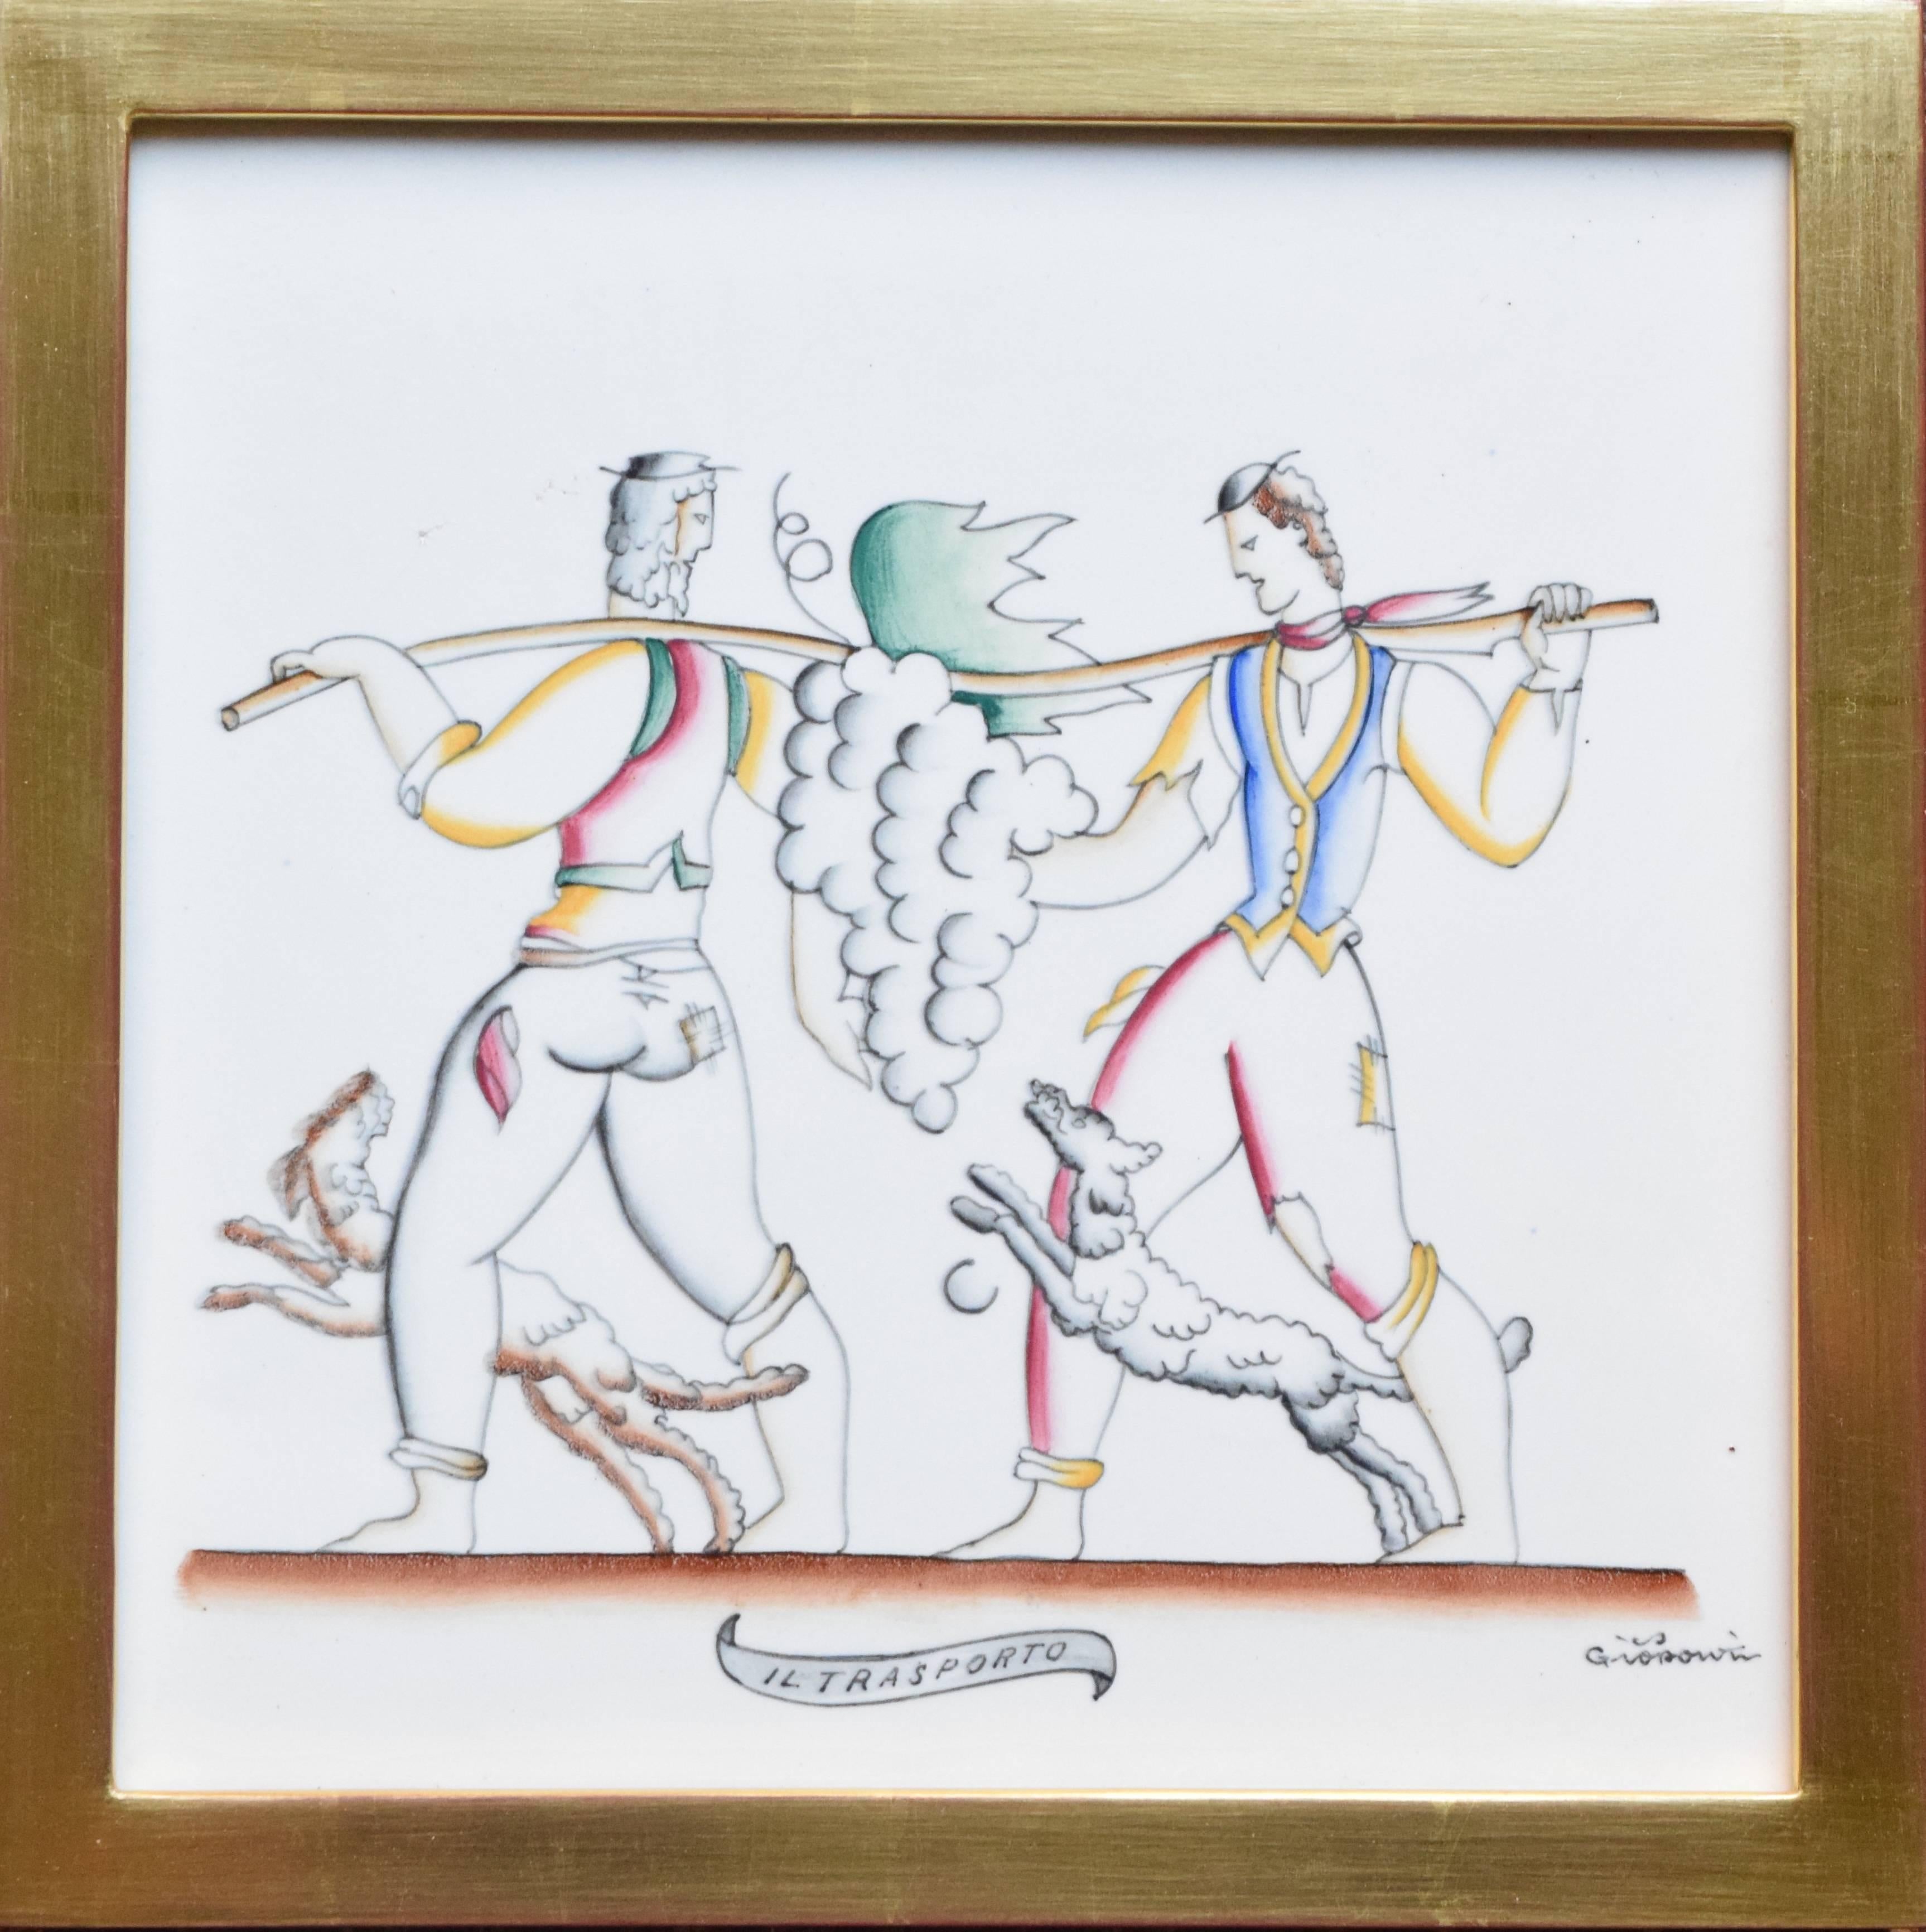 Store closing-- last day is 7/31. Offers welcome! Two framed ceramic tiles, 